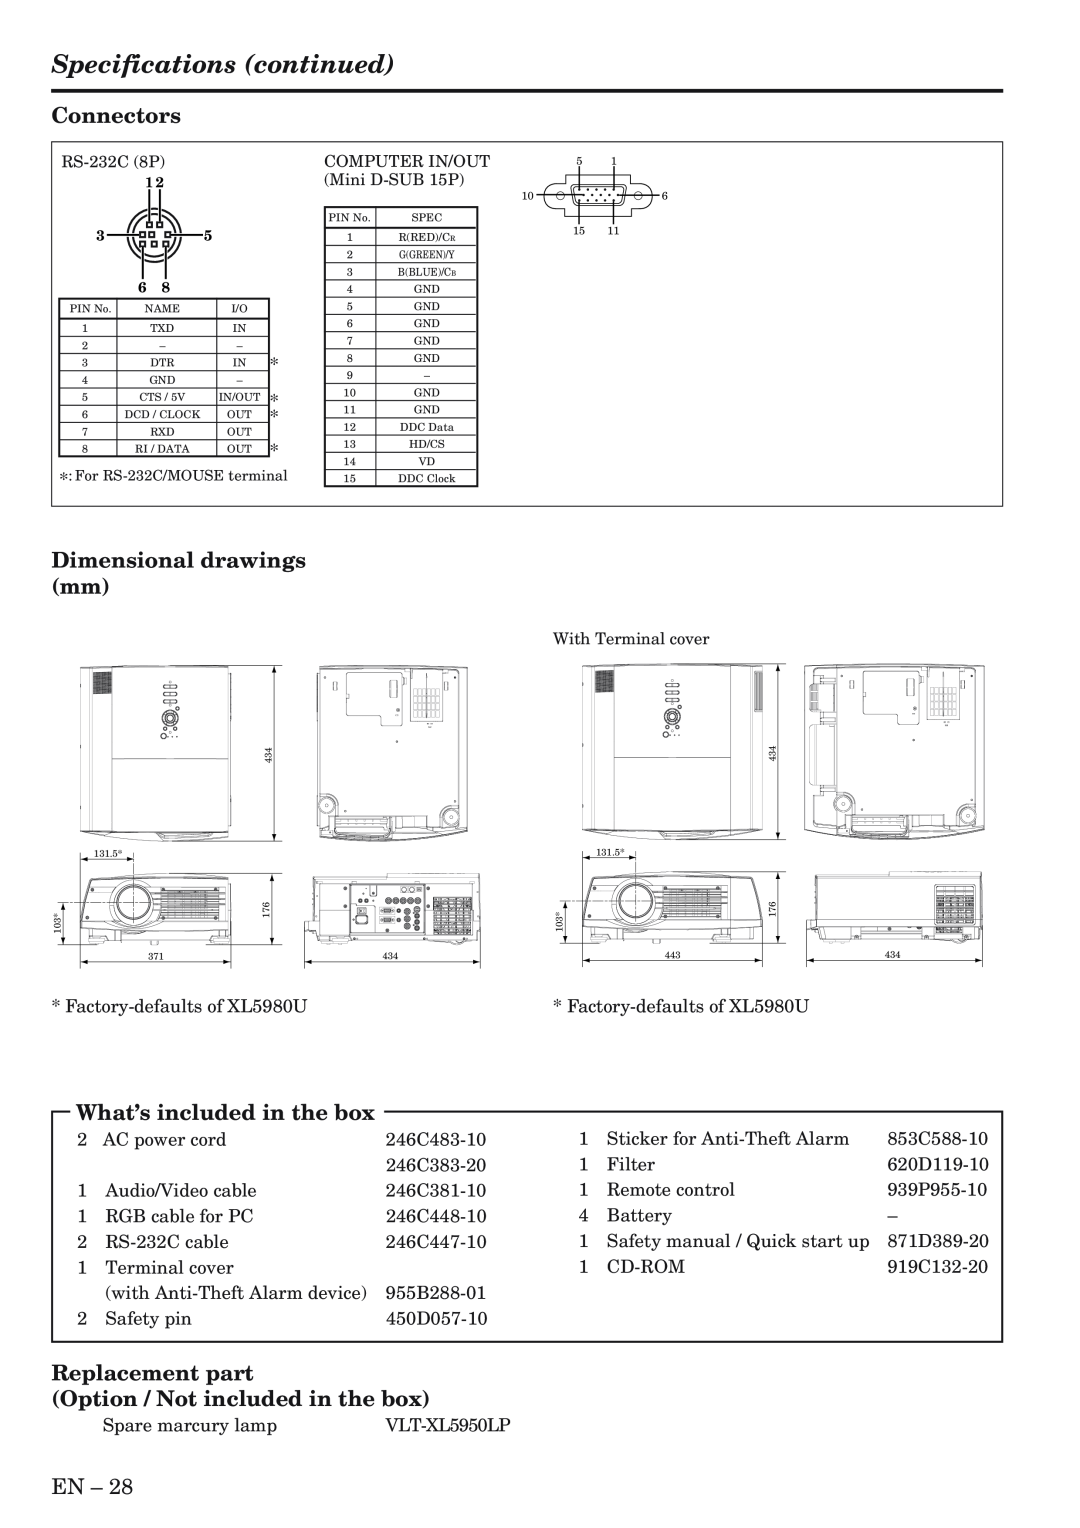 Mitsubishi Electronics XL5980U Specifications continued, Connectors, Dimensional drawings mm, What’s included in the box 